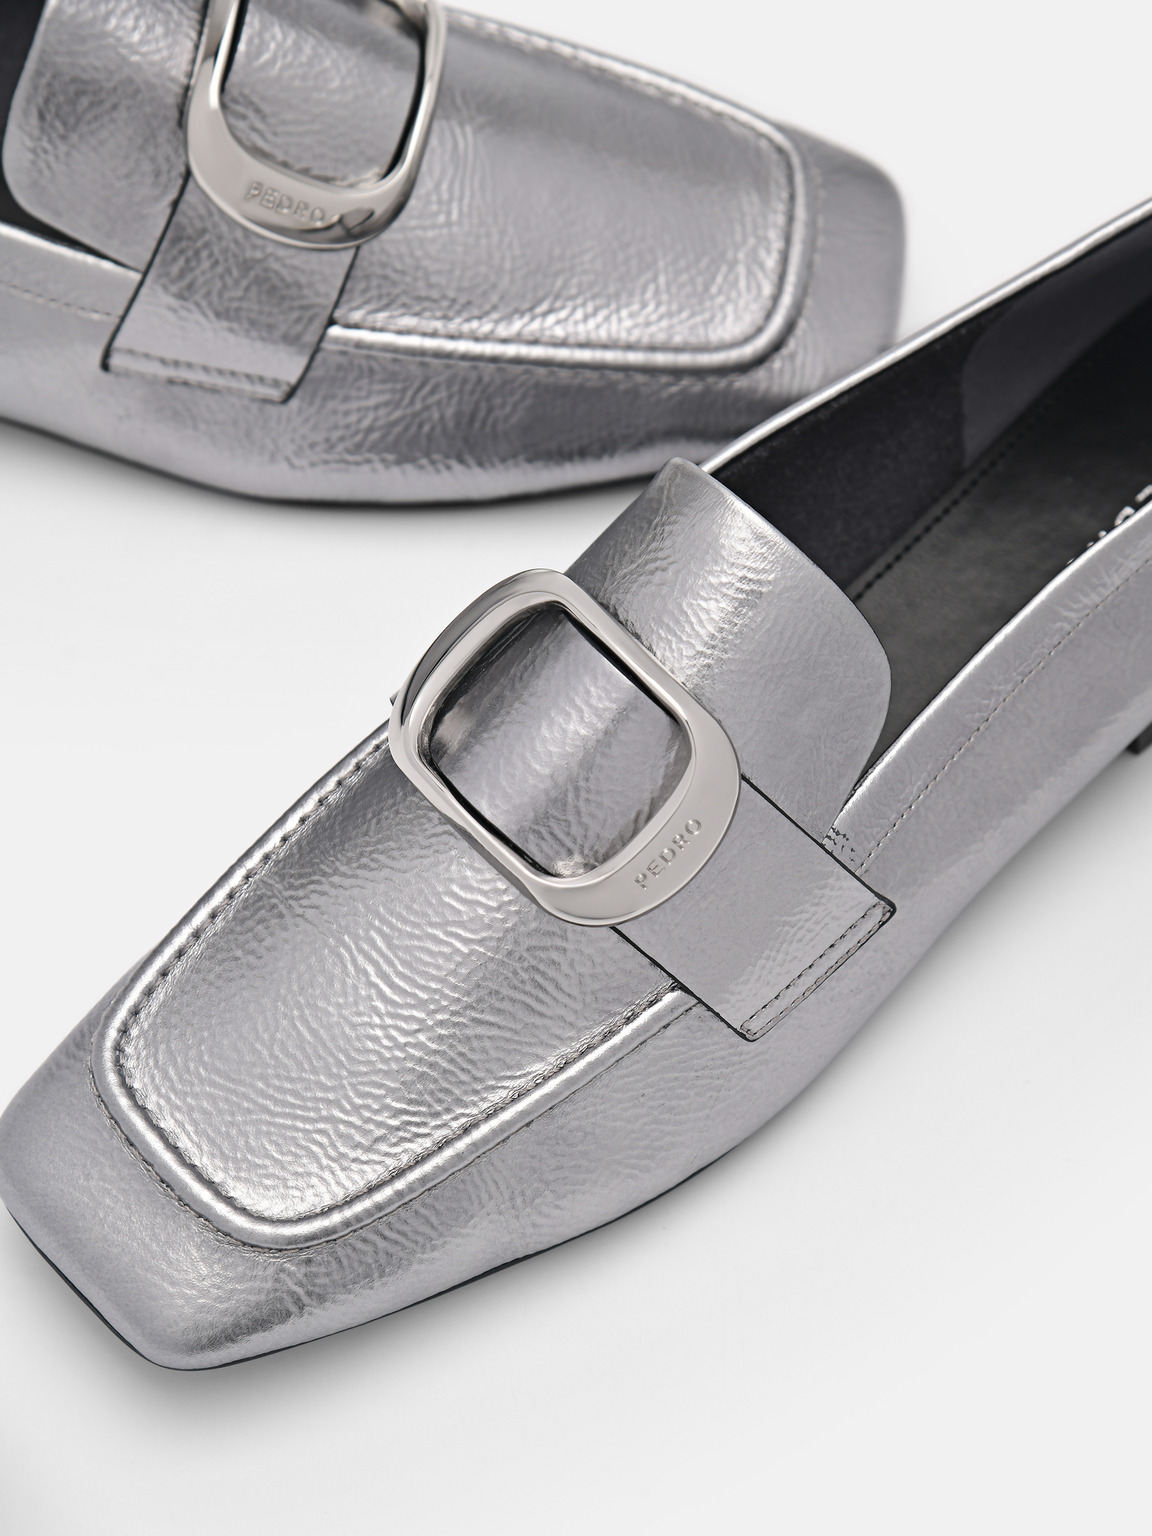 Eden Leather Loafers, Pewter